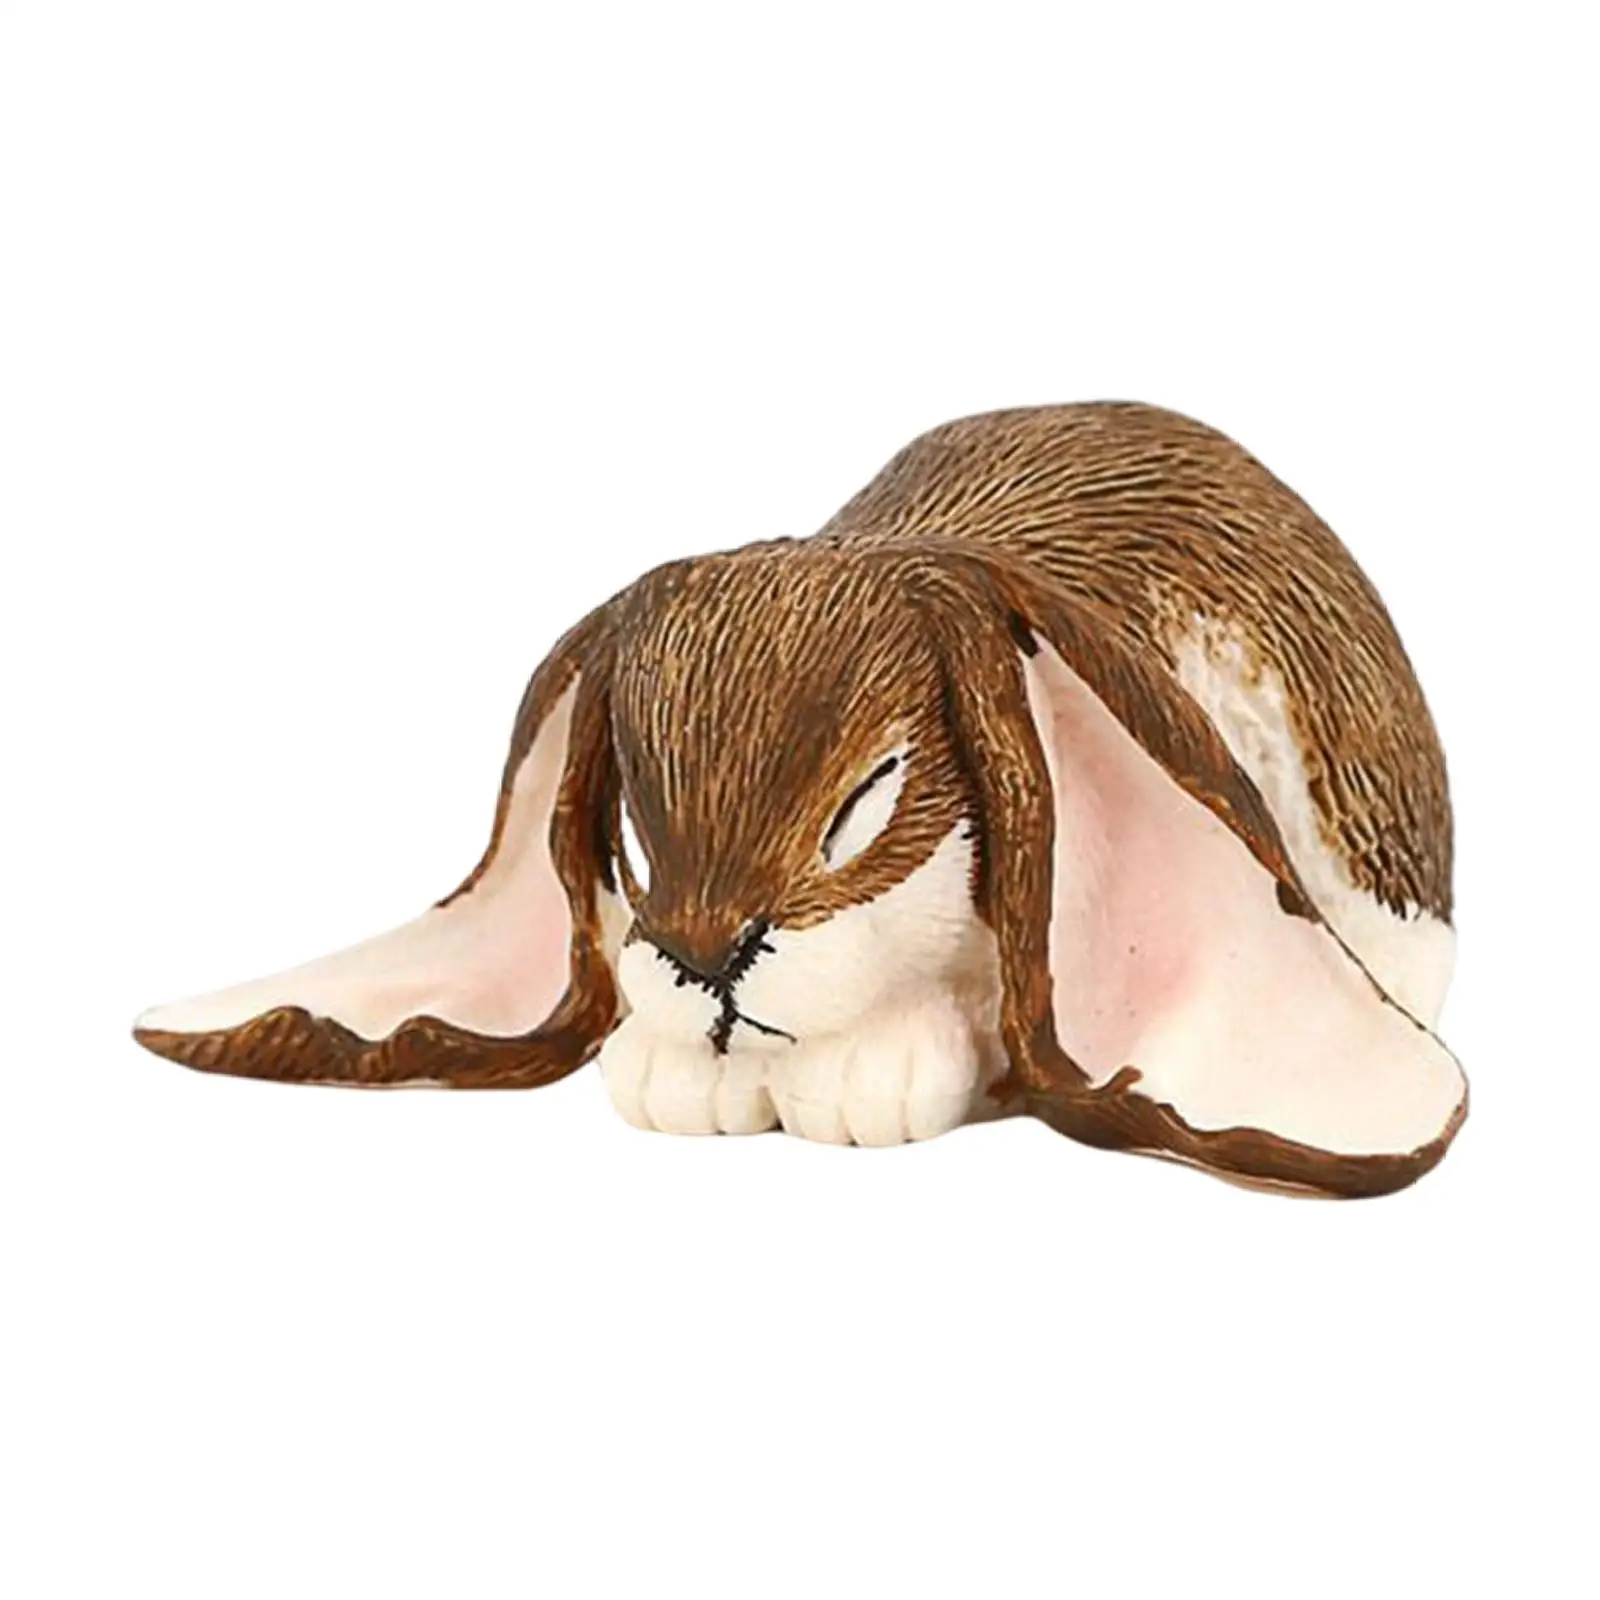 Simulation Rabbit Toy Figure Decor Mini Cute Solid for Boys and Girls Kids